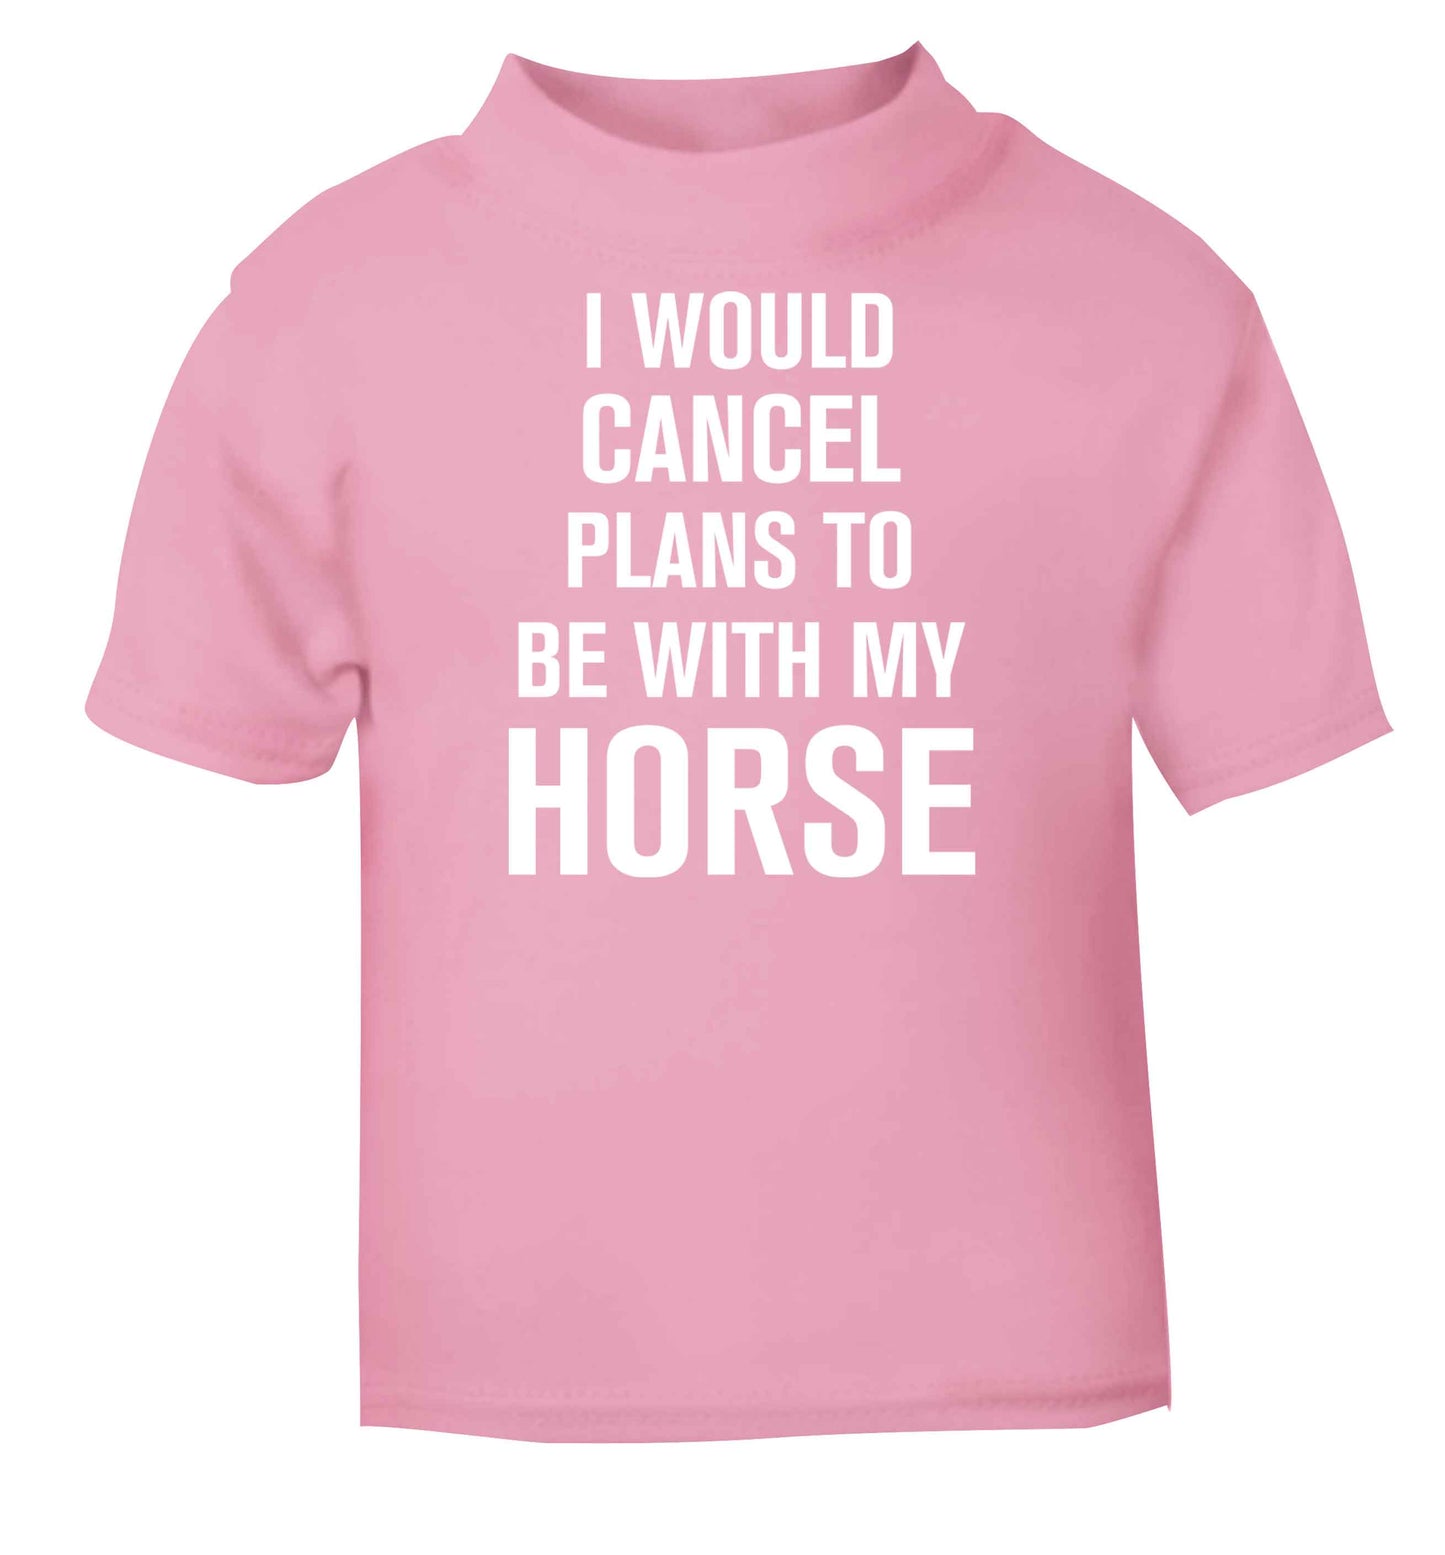 I will cancel plans to be with my horse light pink baby toddler Tshirt 2 Years